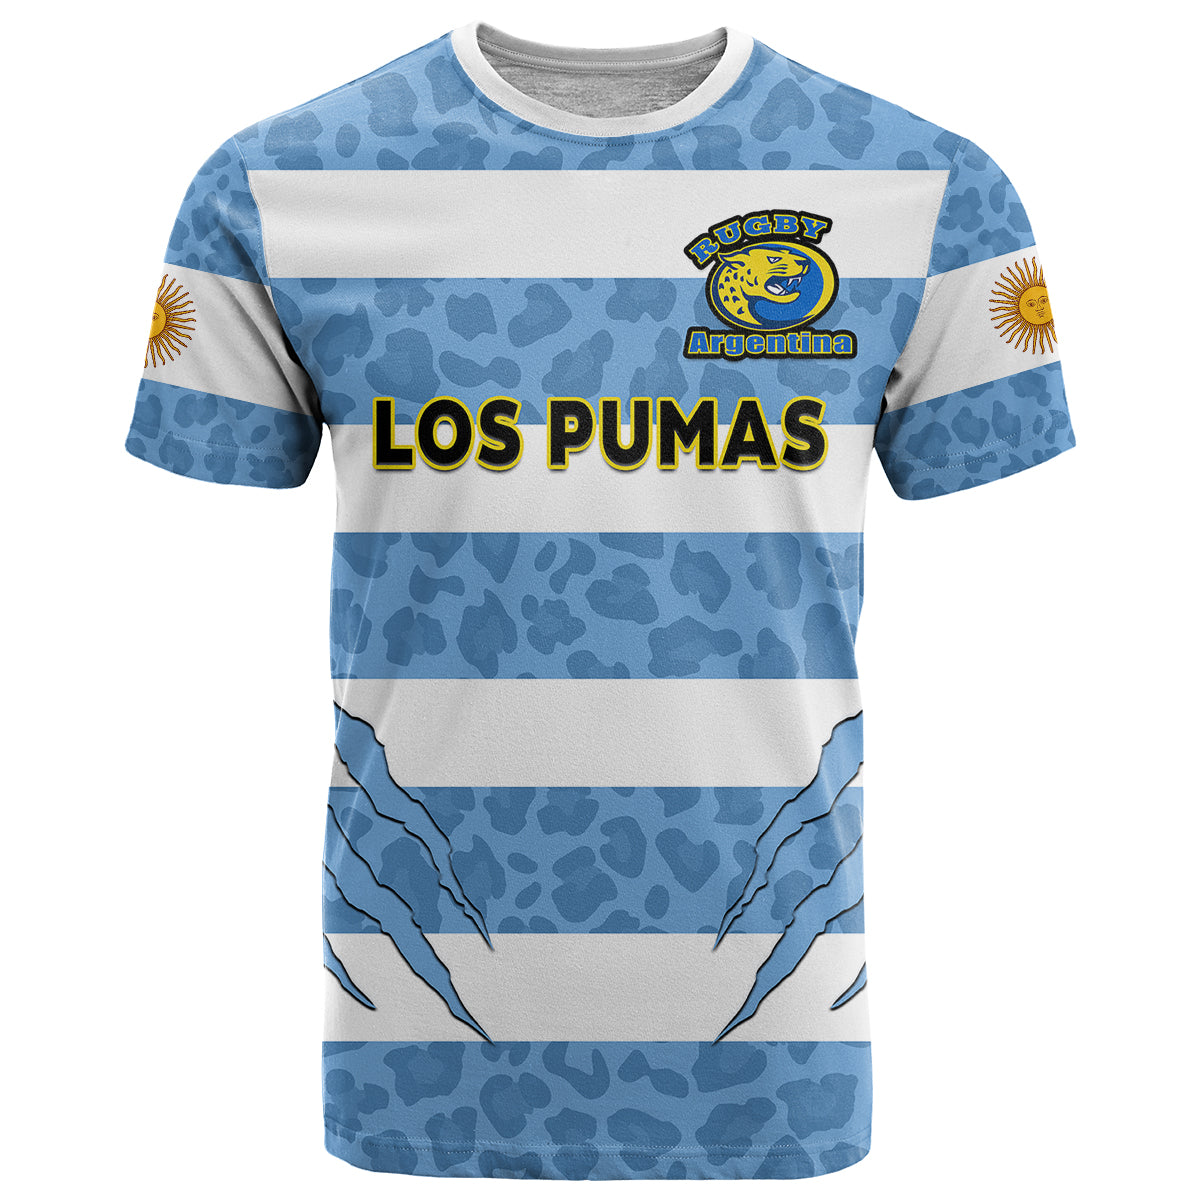 custom-text-and-number-argentina-rugby-7s-vamos-pumas-t-shirt